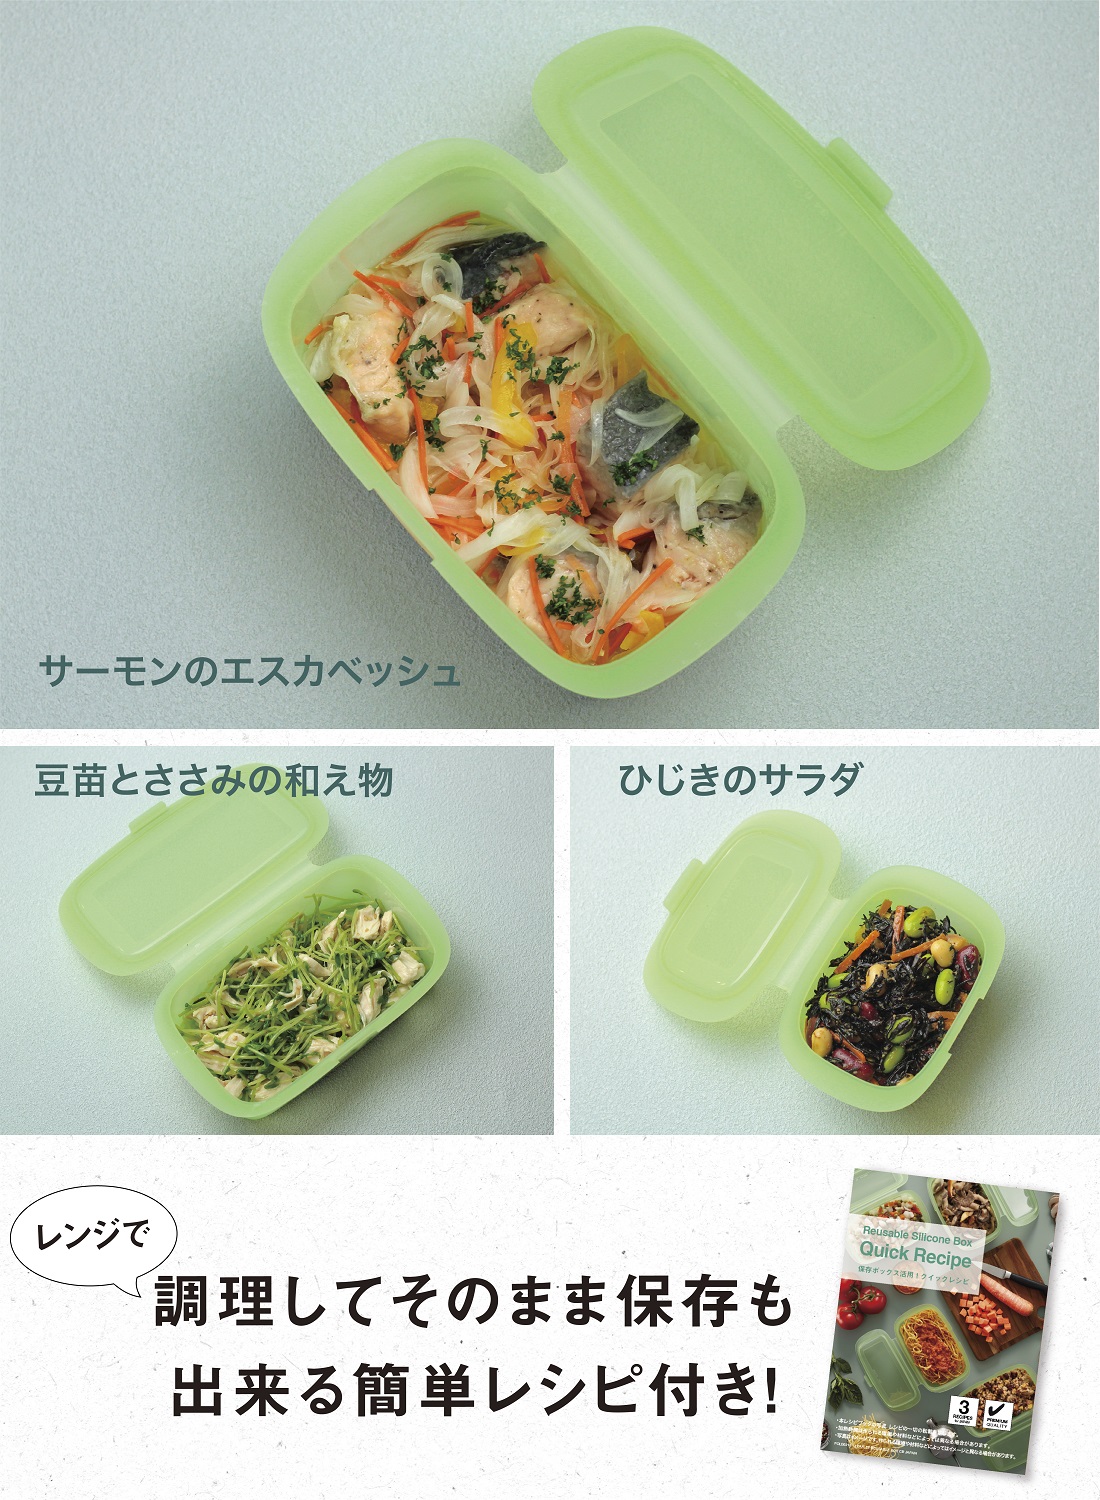 Lekue Reusable Silicone Food Storage Box Container, 0.2L, Green